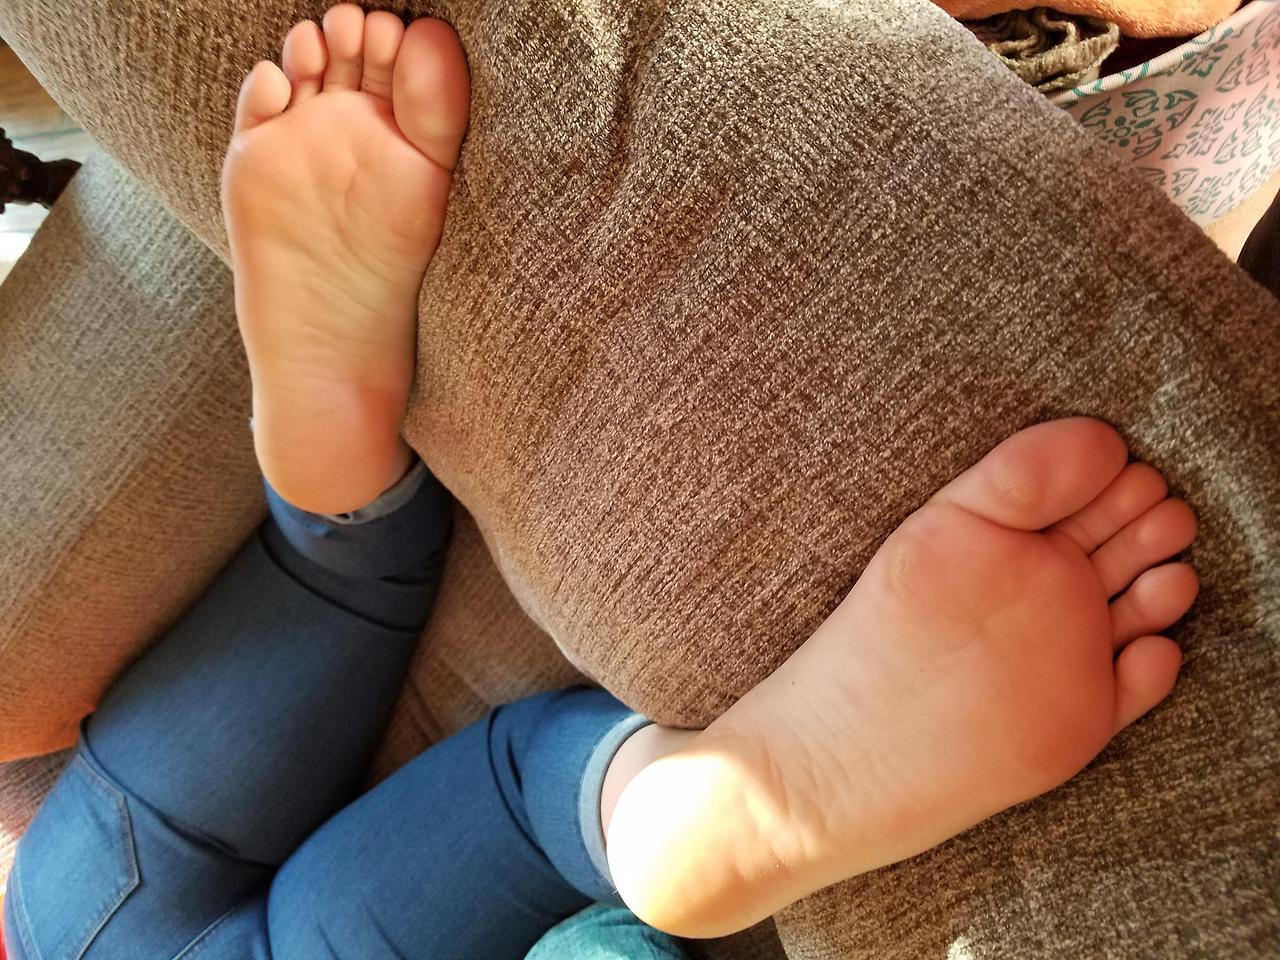 The Wife Feet Toes Footfetis